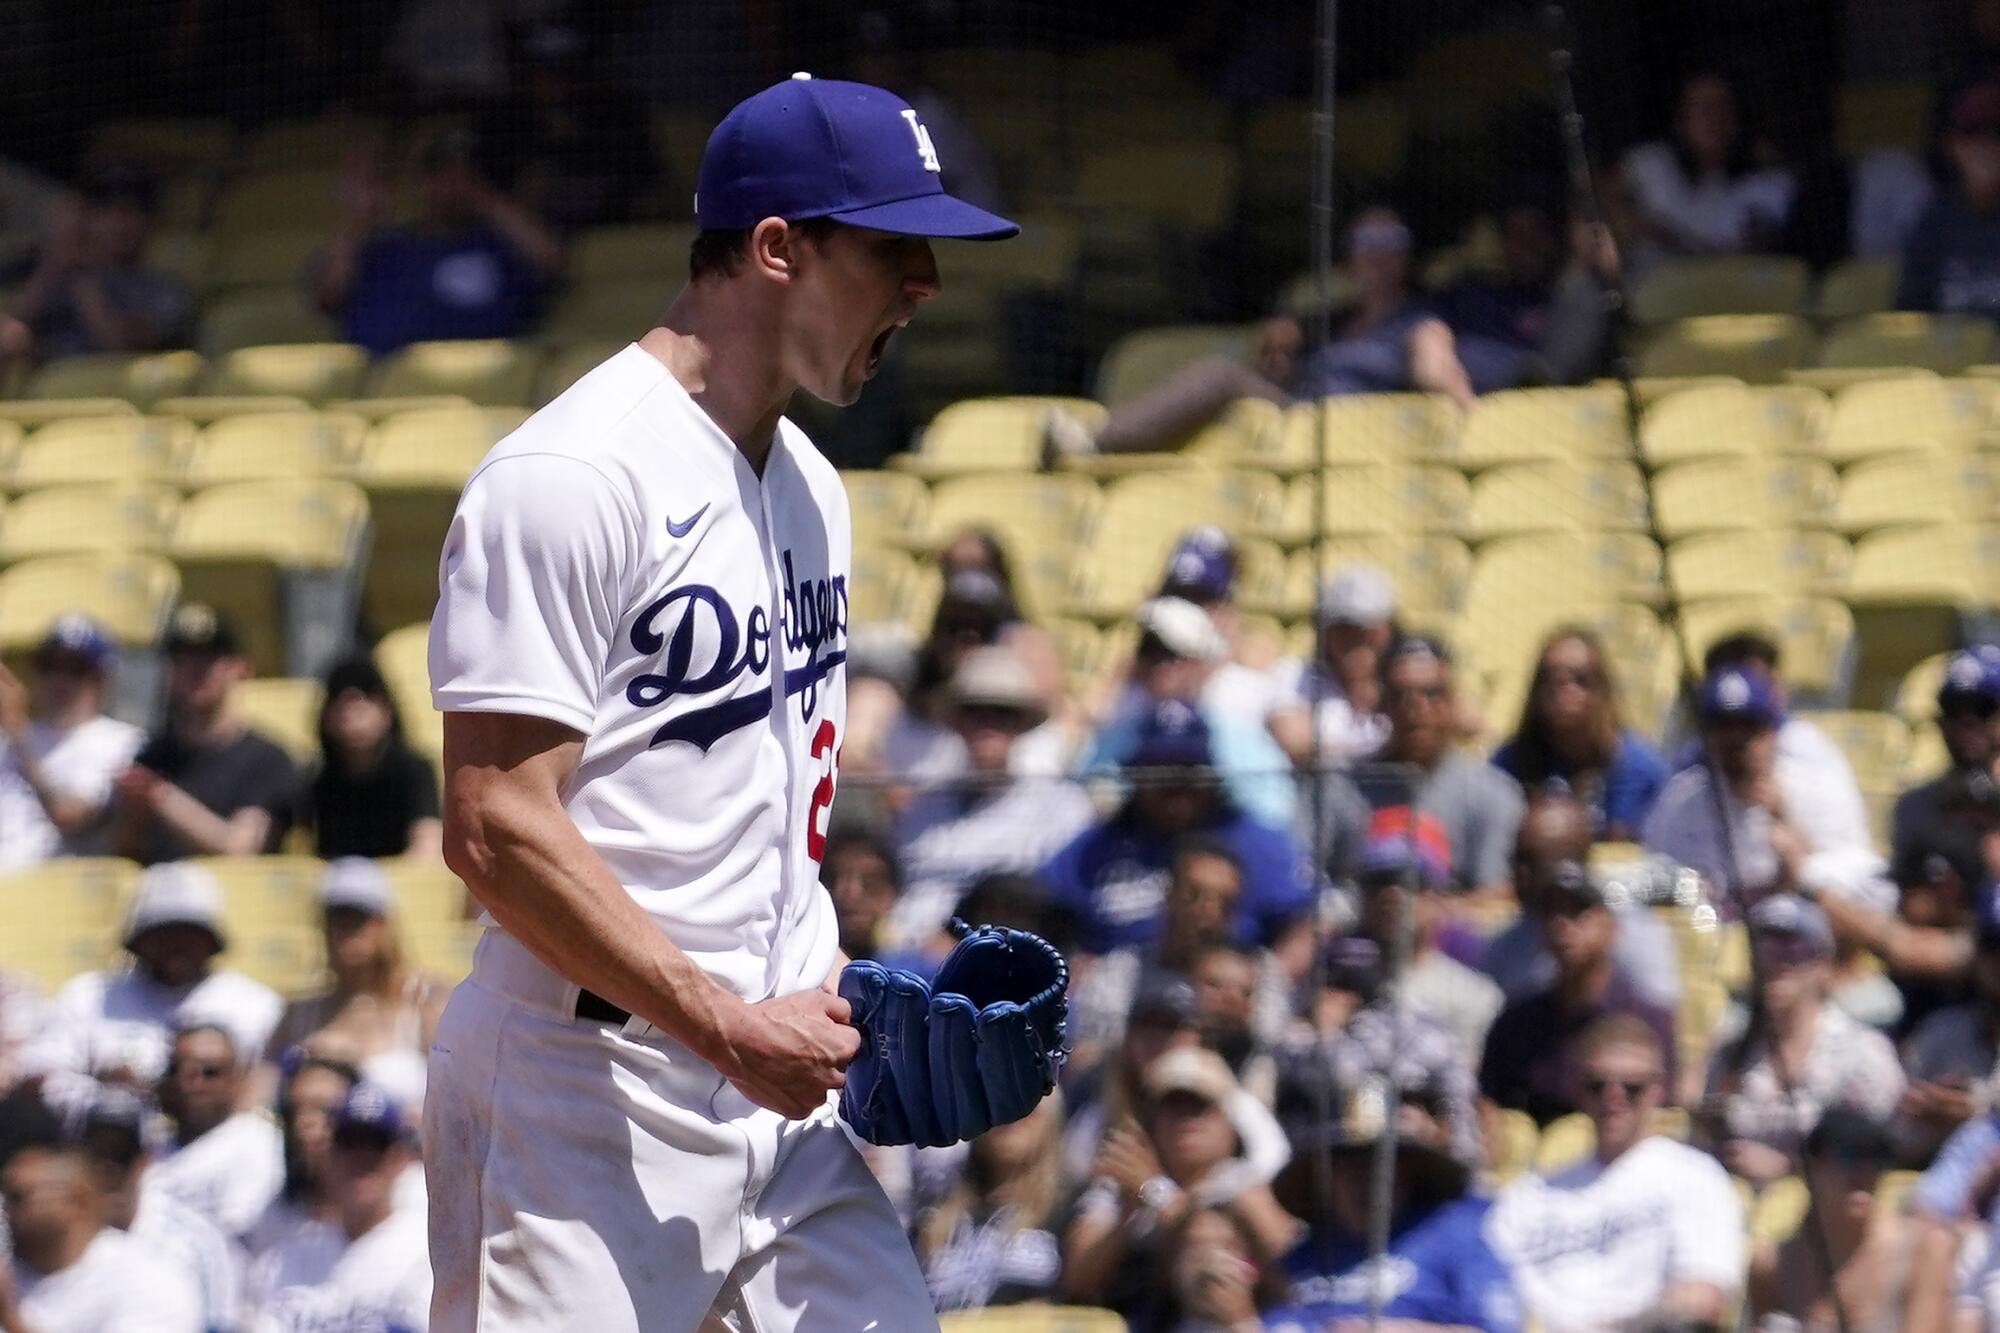 Dodgers starter Walker Buehler celebrates as the final out is made in the fourth inning with the bases loaded in May 2022.